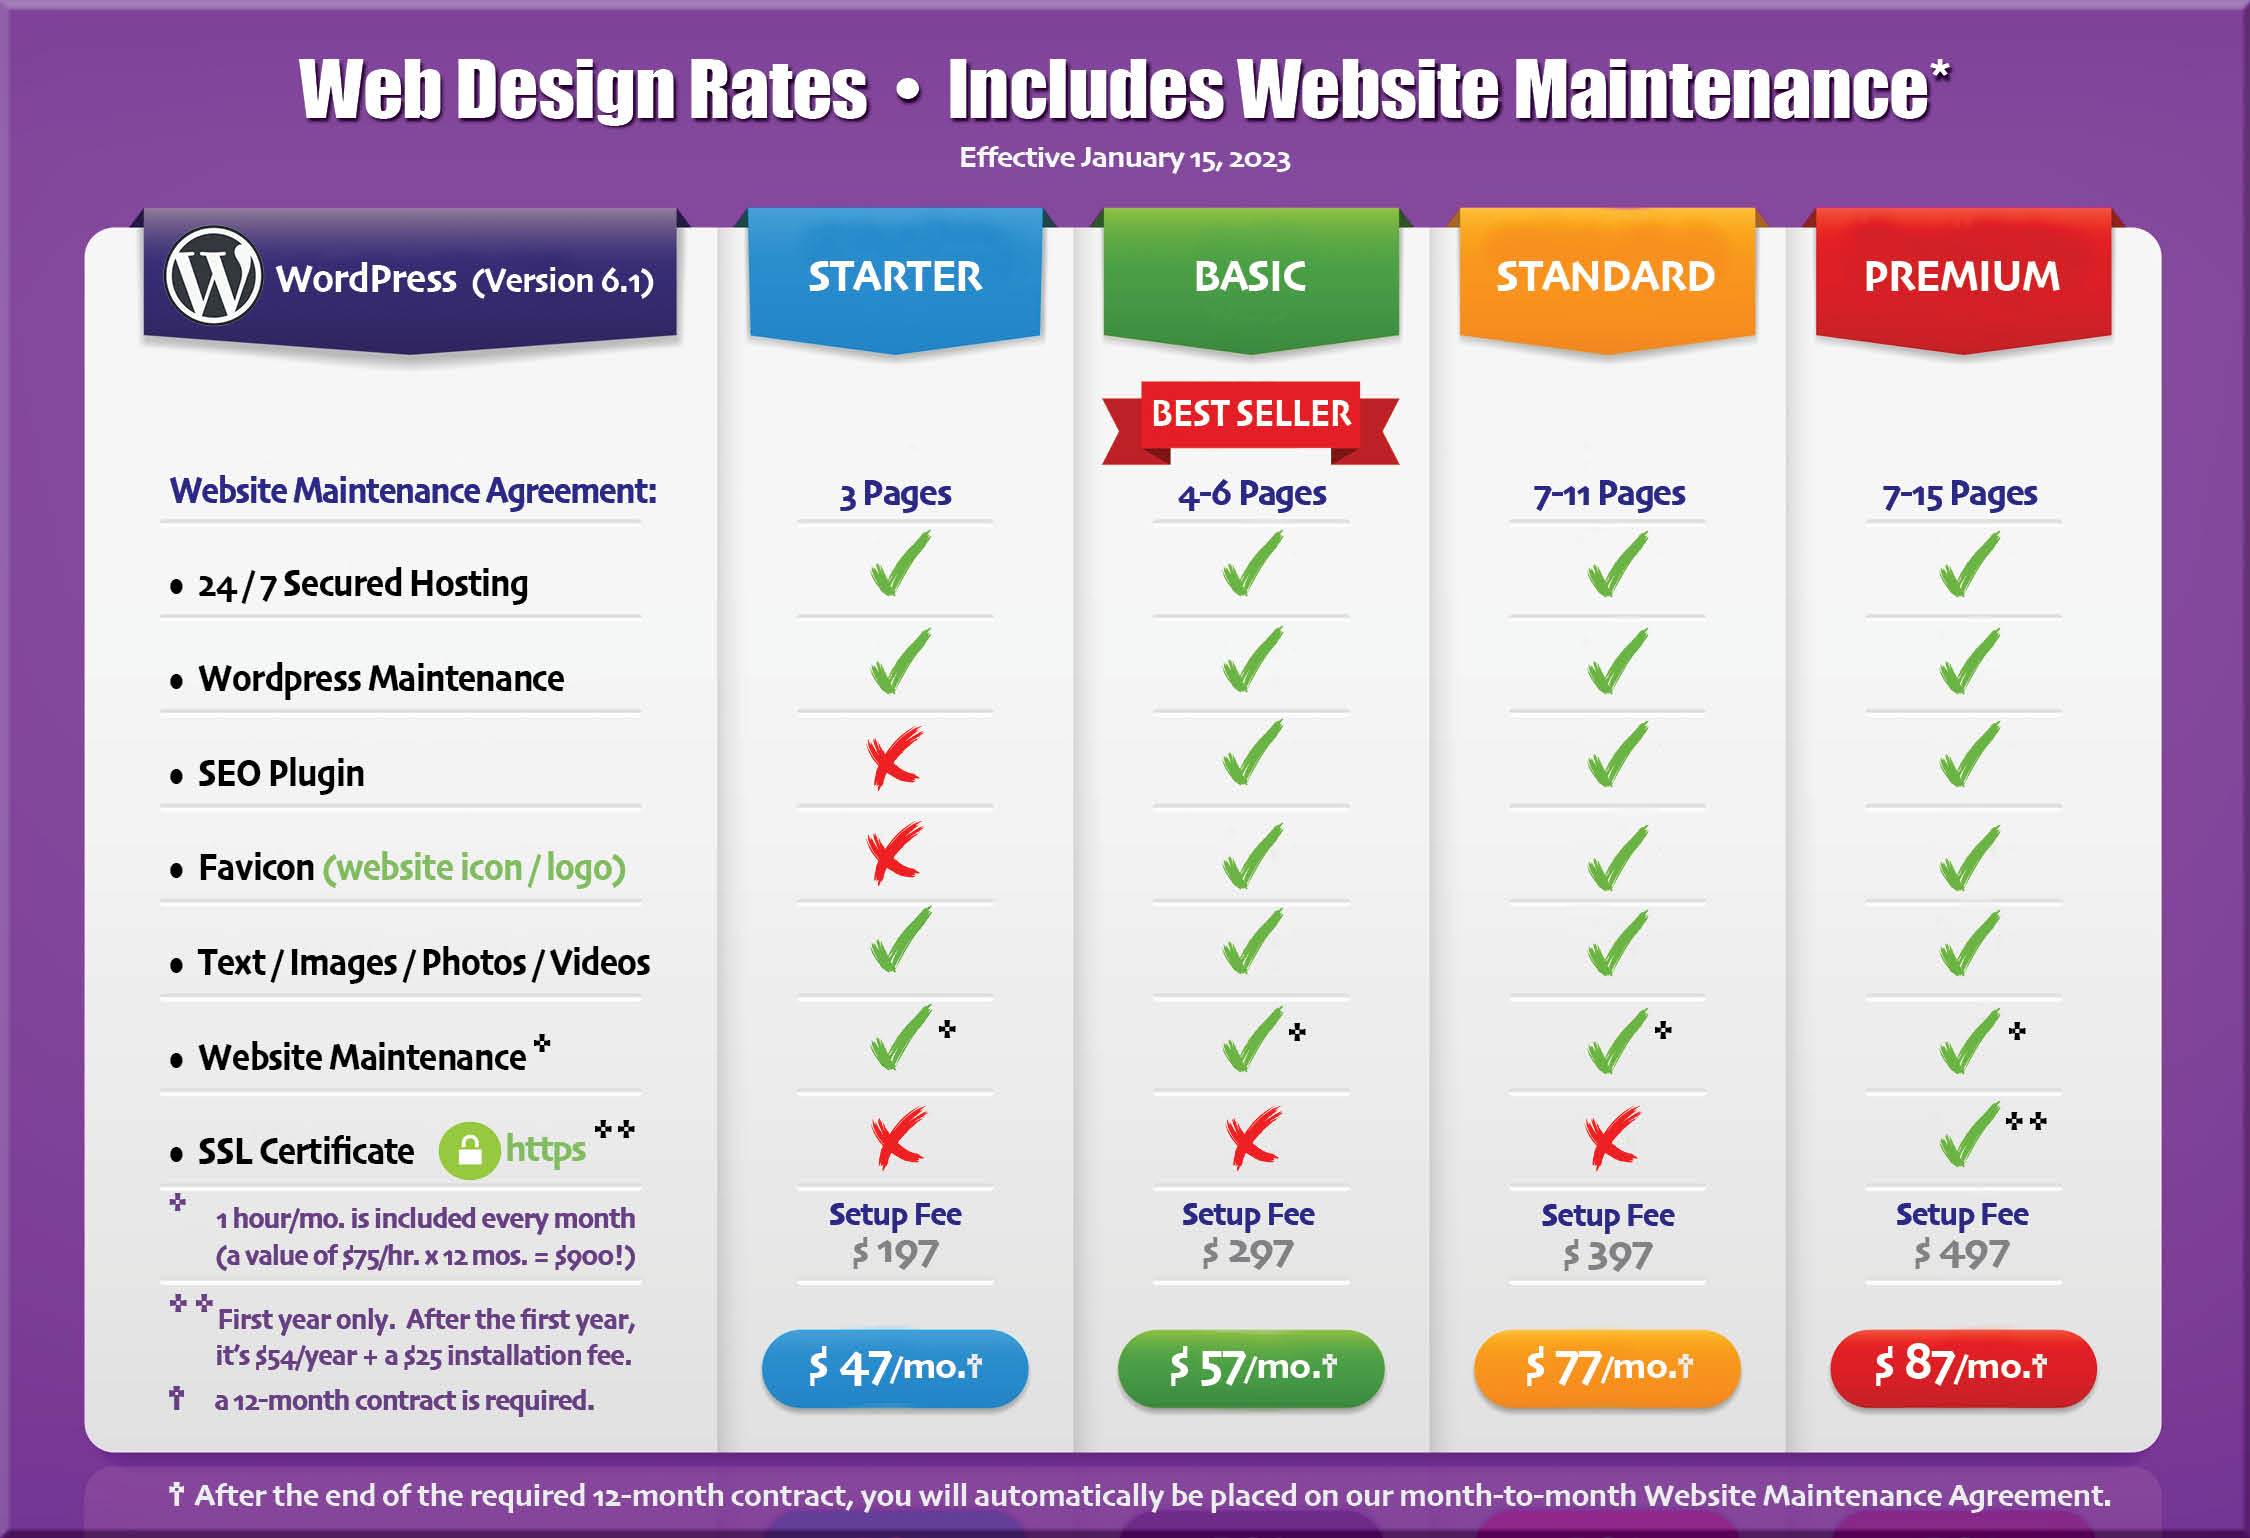 website-rate-card-effective-january-15-2023